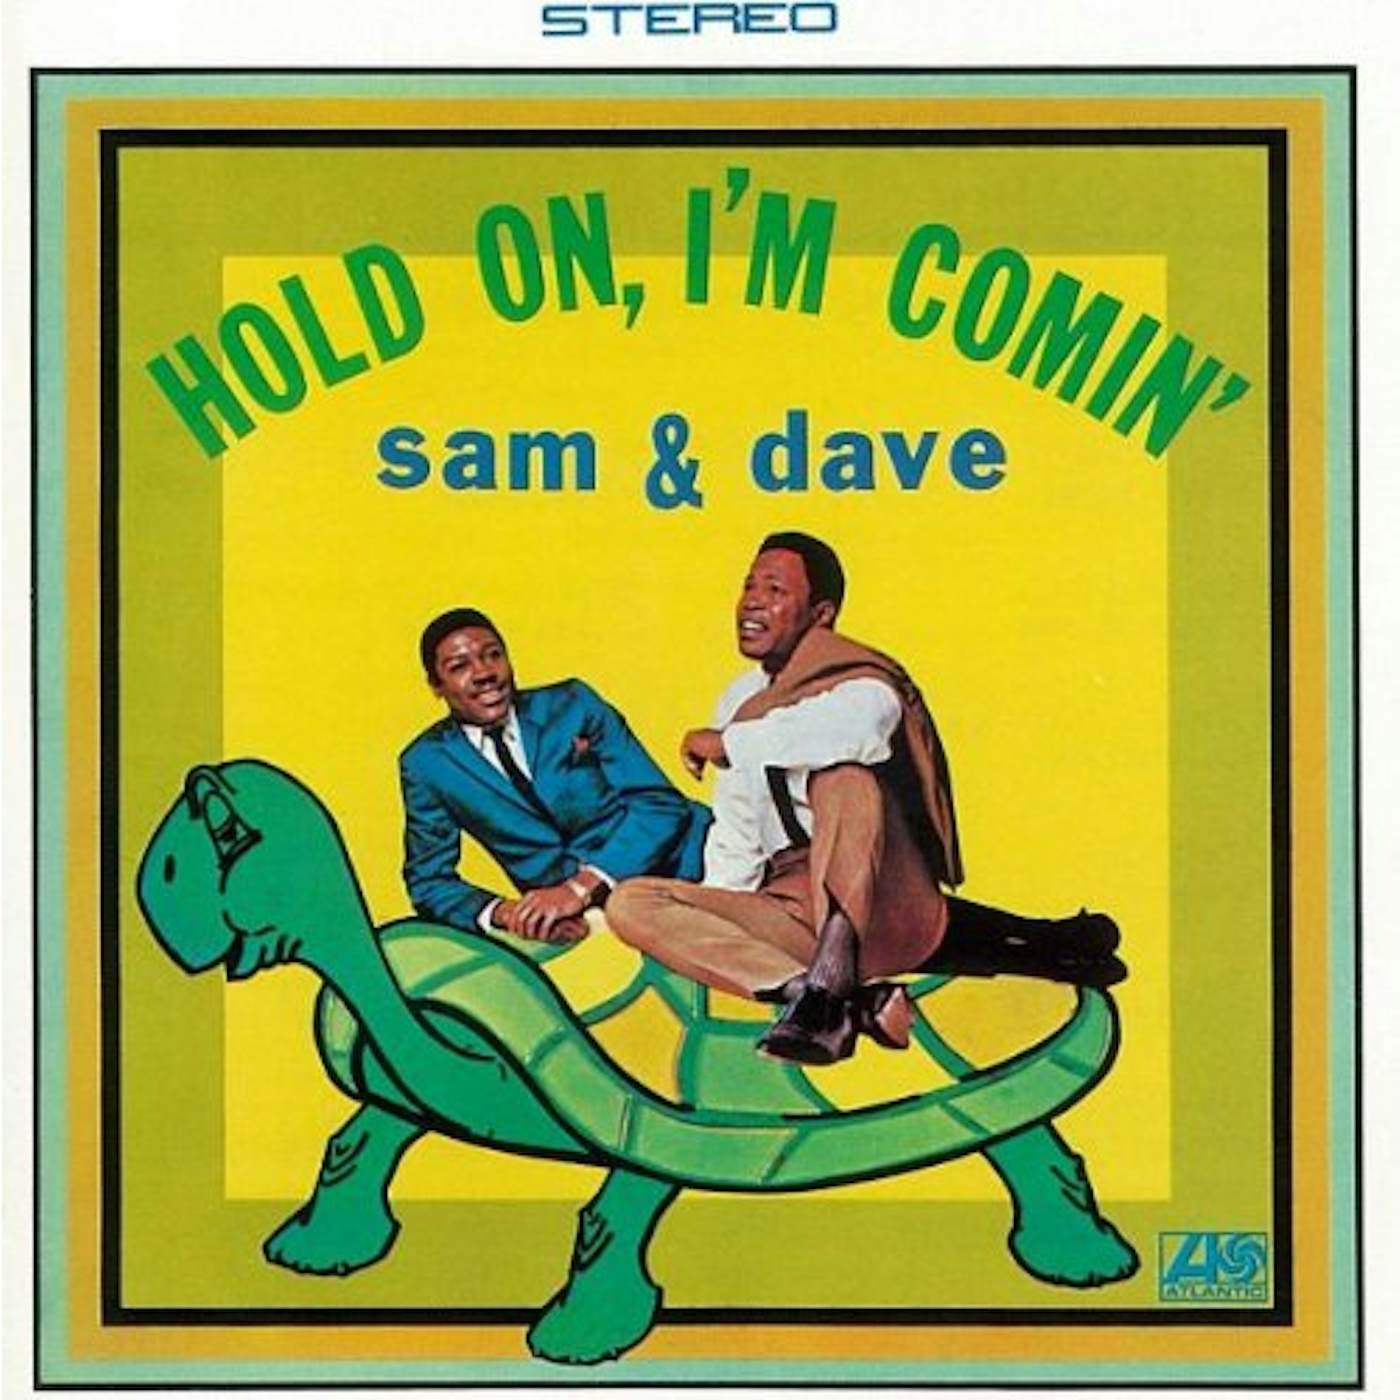 Sam & Dave HOLD ON. IM COMING CD